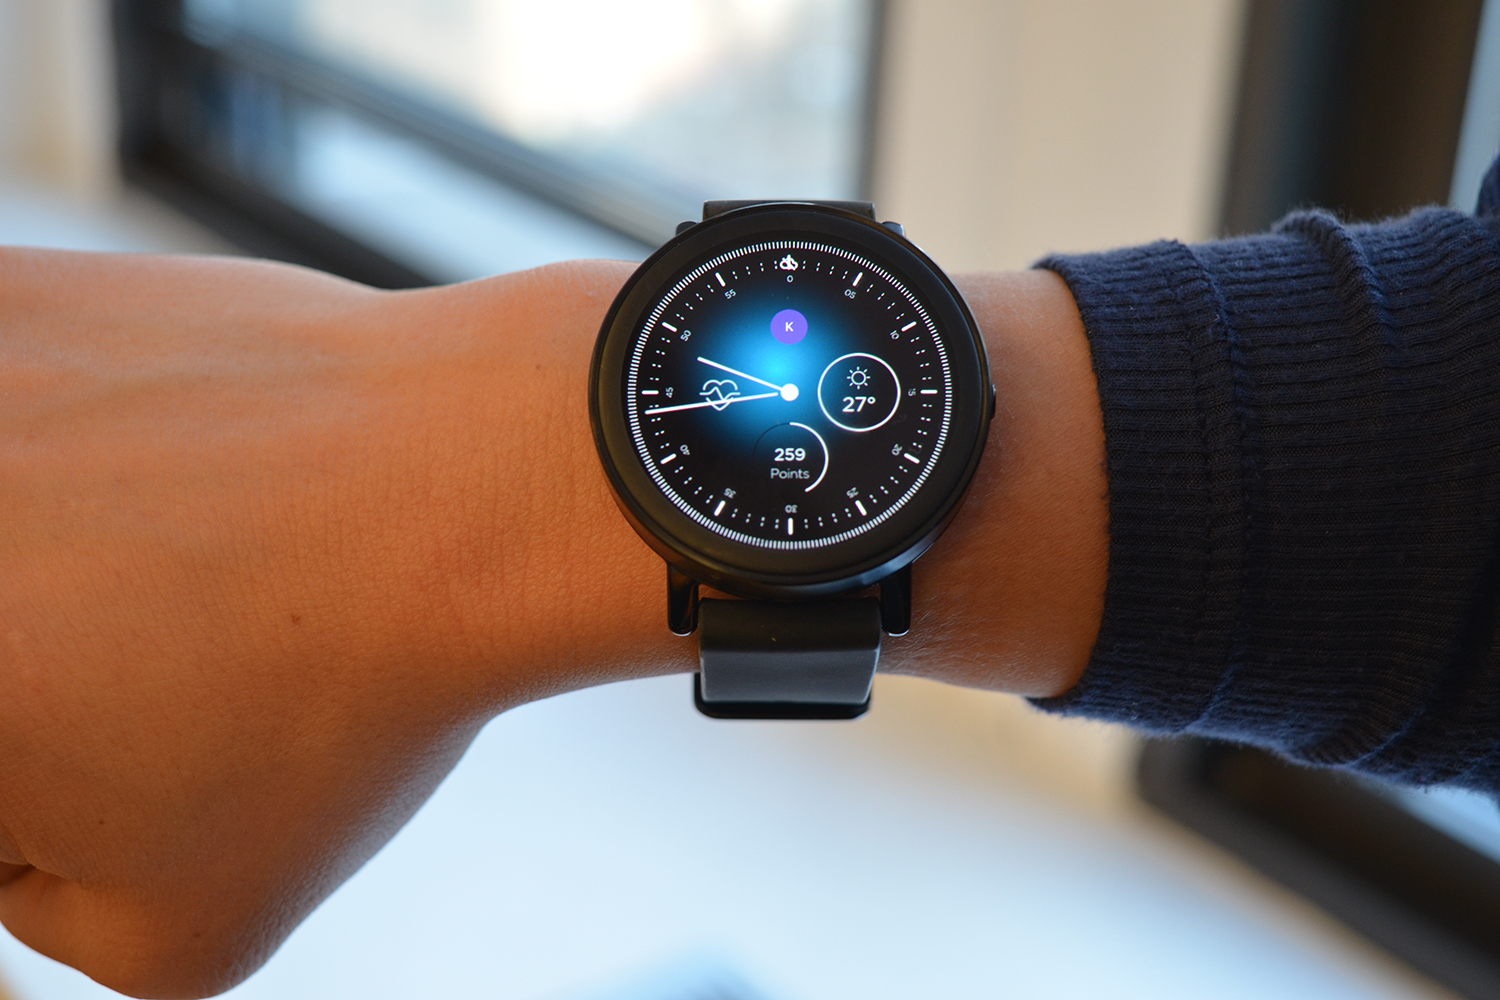 Misfit Vapor X review: Great looking smartwatch ruined by older hardware